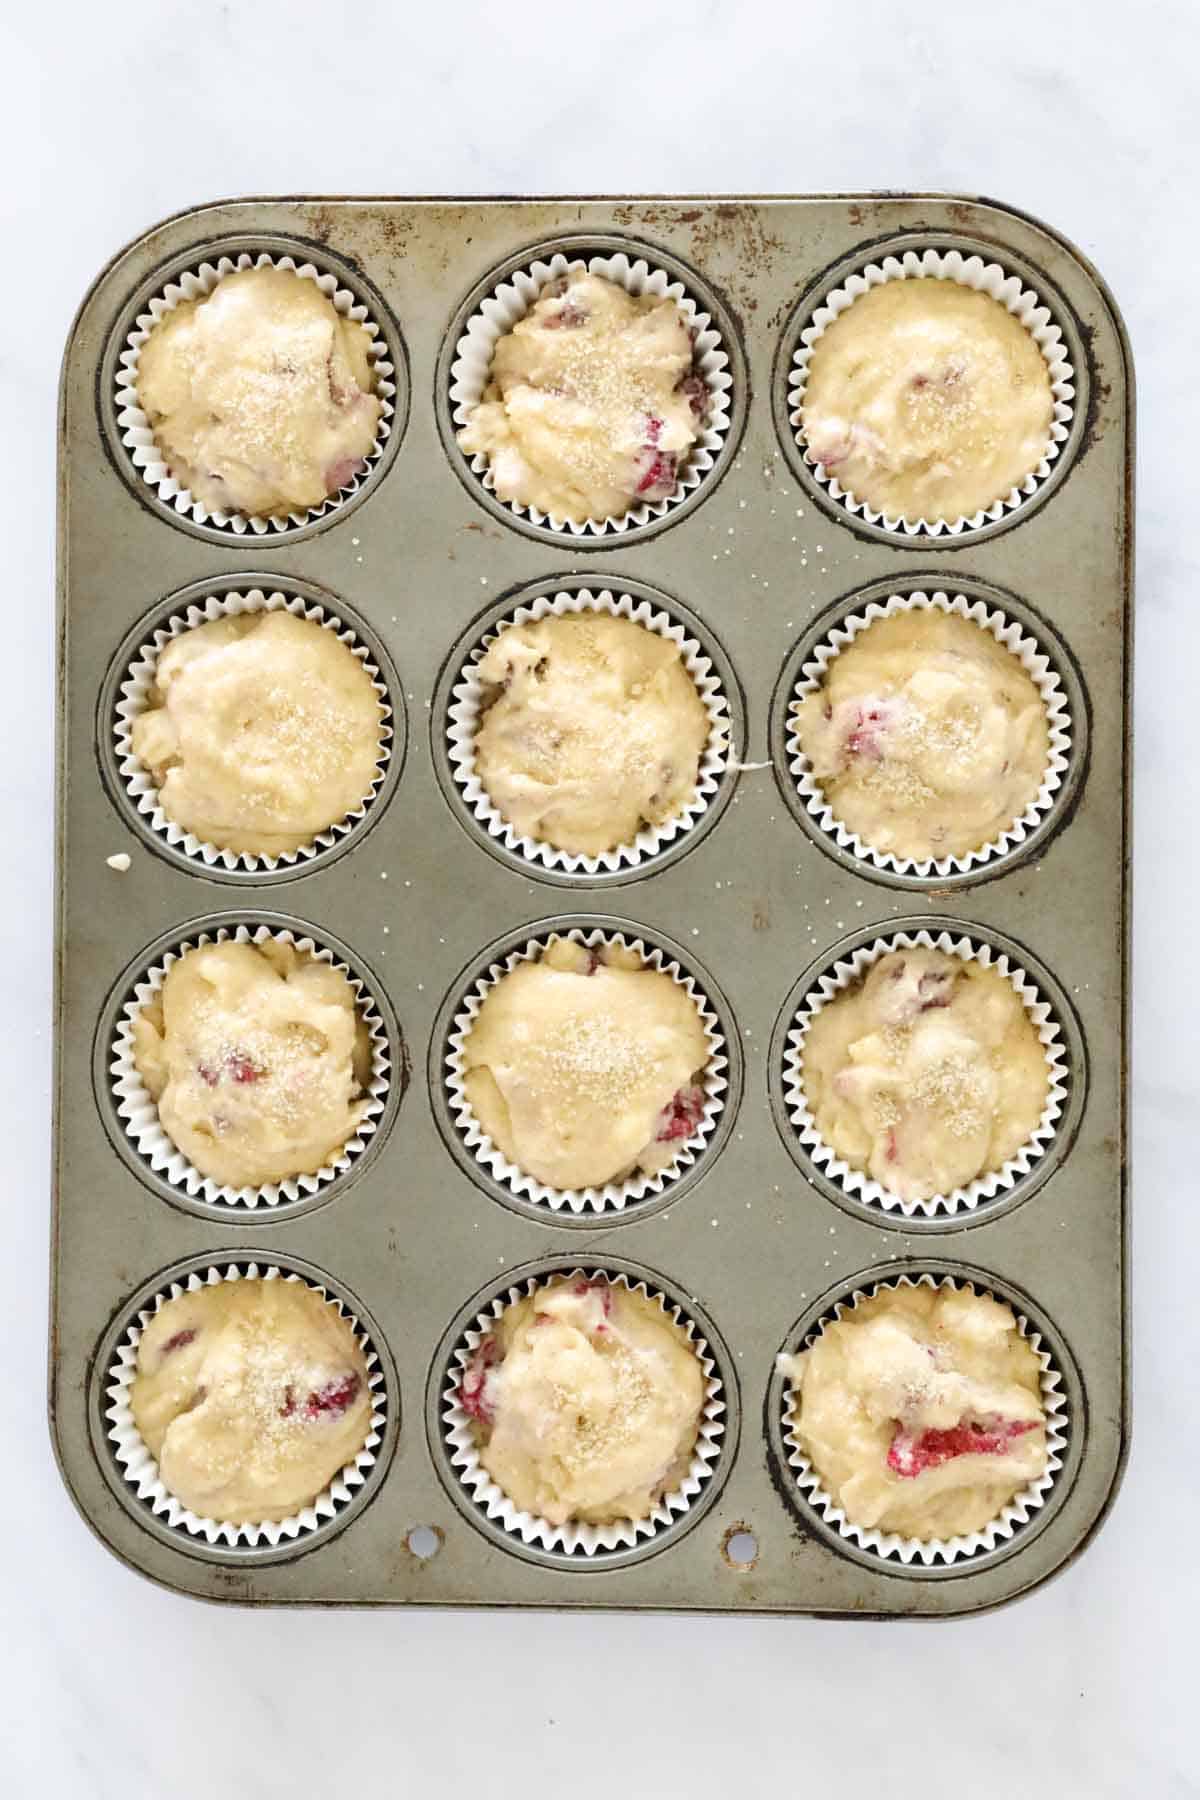 Mixture spooned into paper cases in a muffin tray.